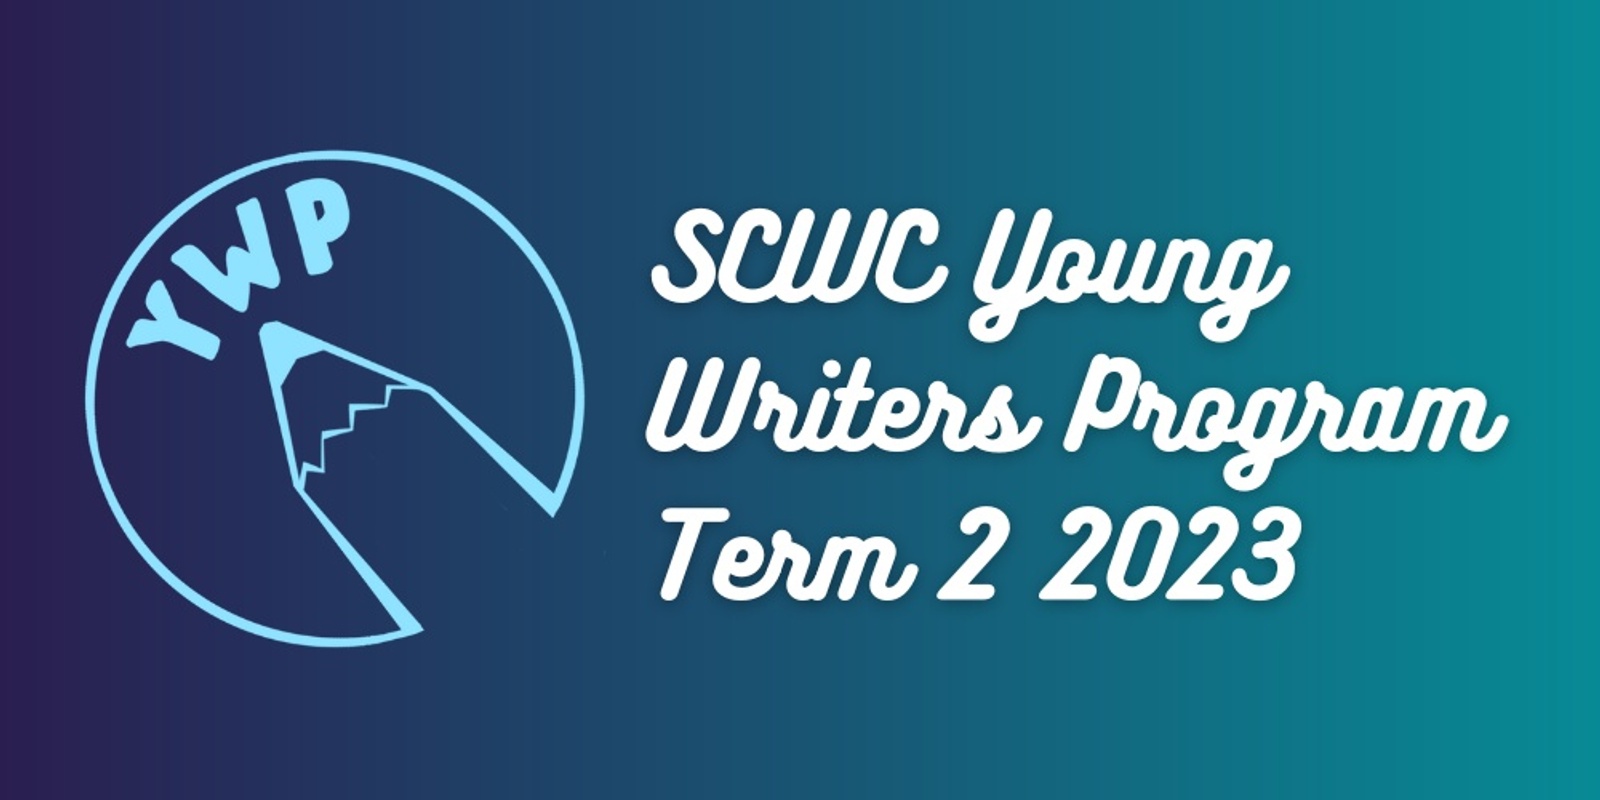 SCWC Young Writers Groups - Term 2 2023